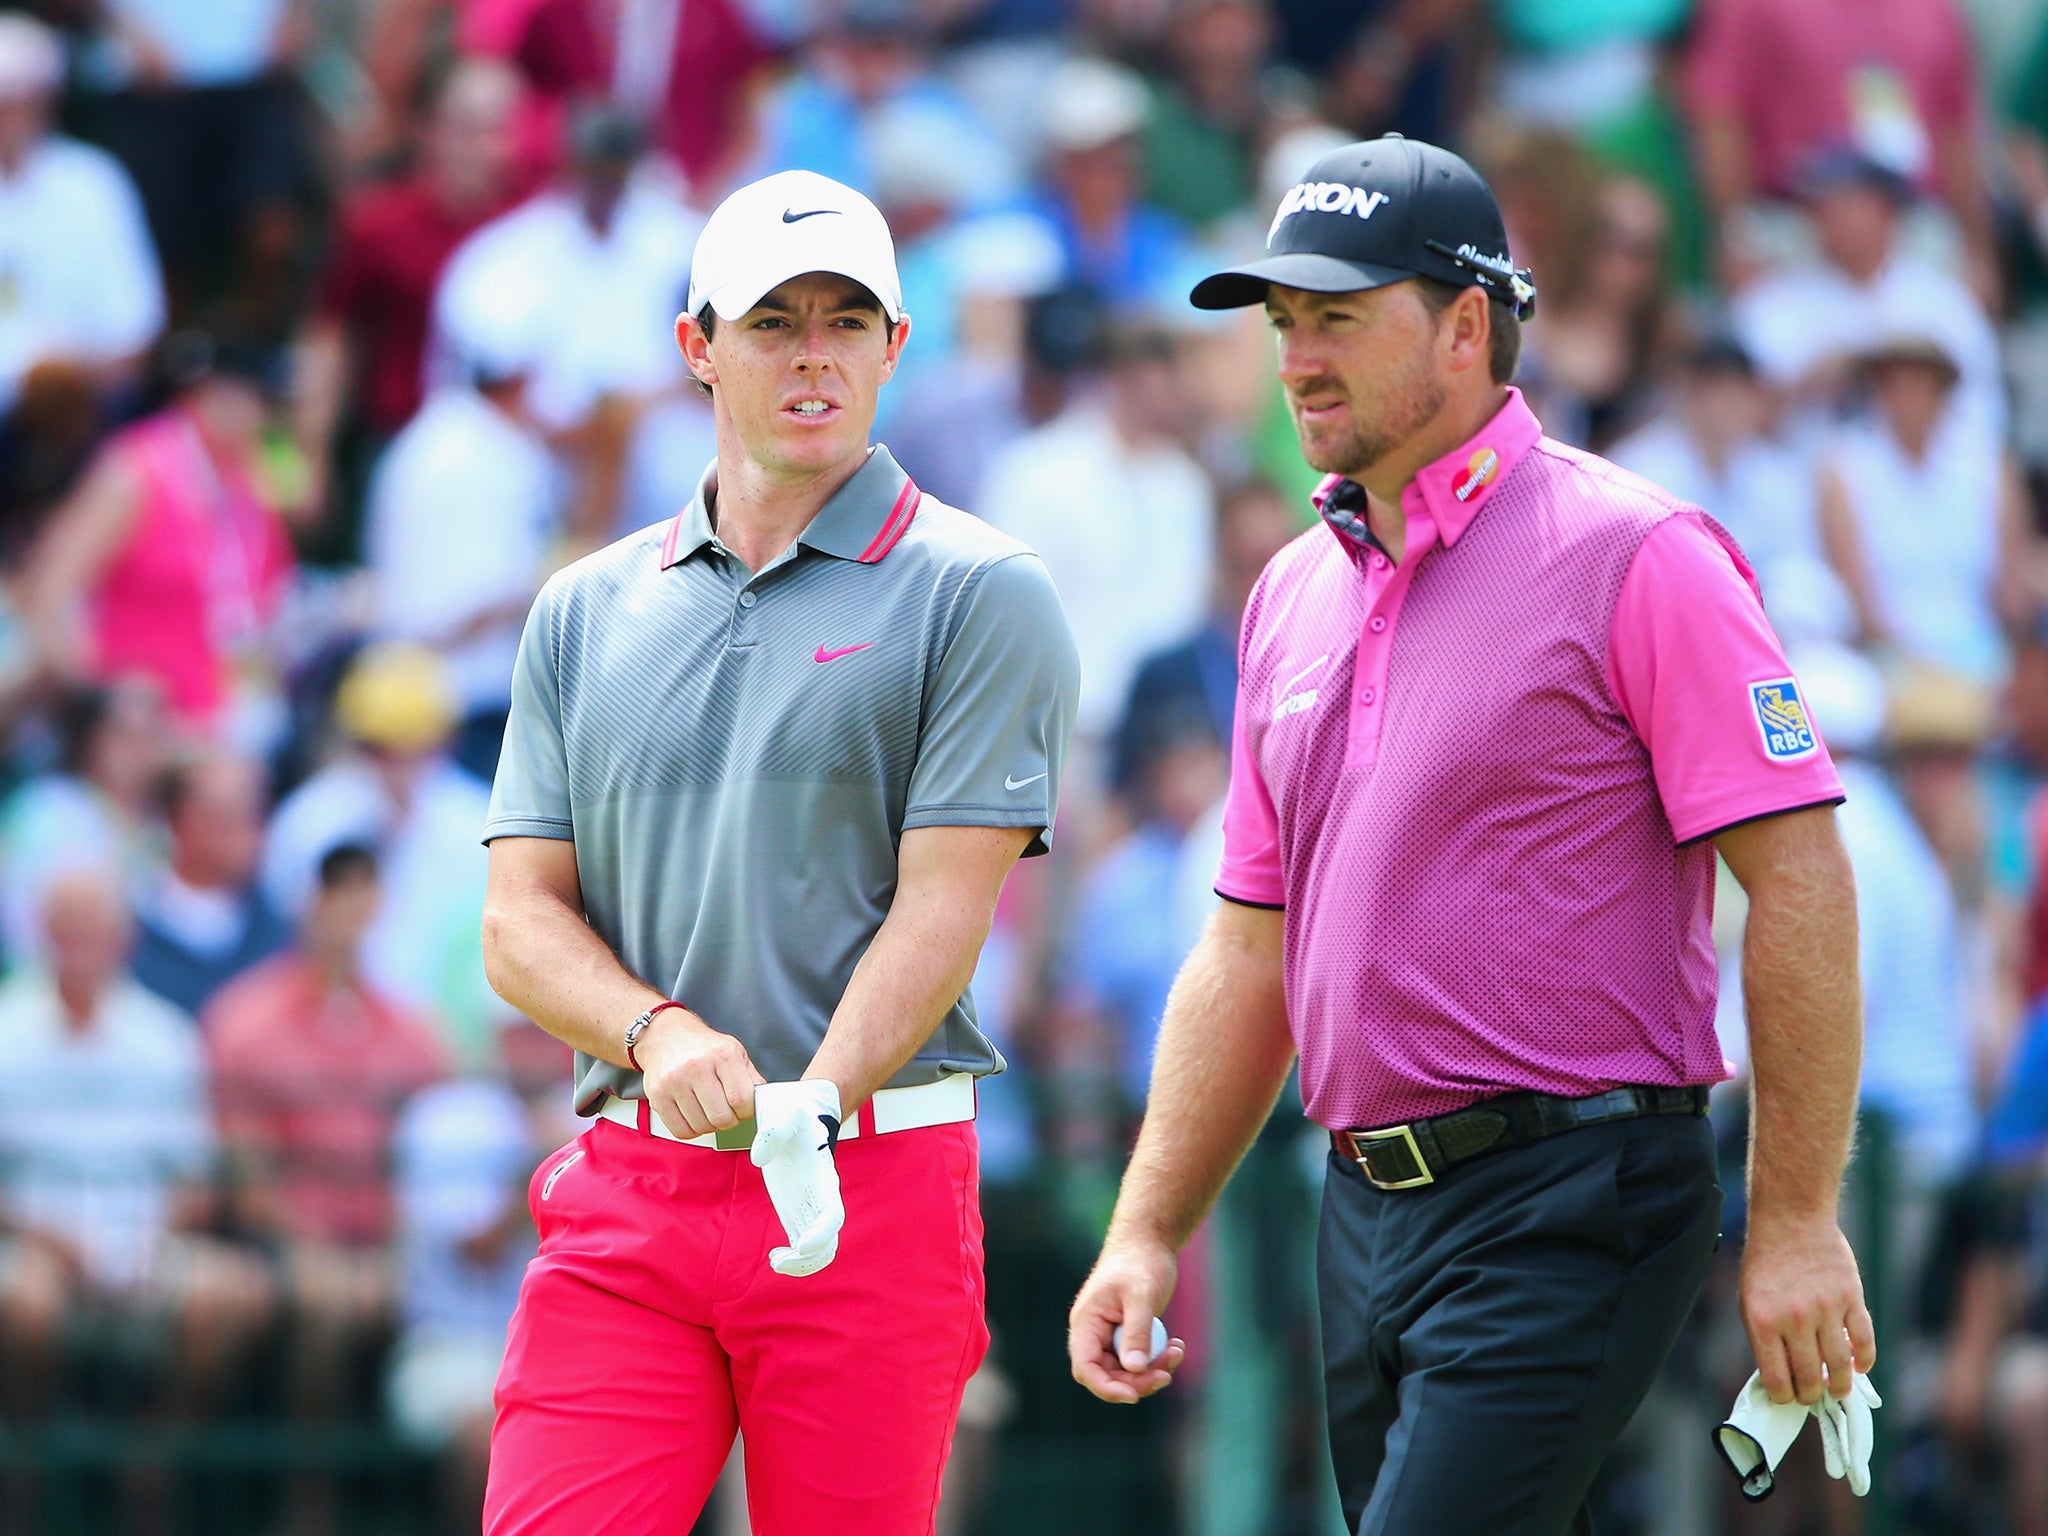 Rory McIlroy of Northern Ireland and Graeme McDowell of Northern Ireland pictured together at the 2014 US Open